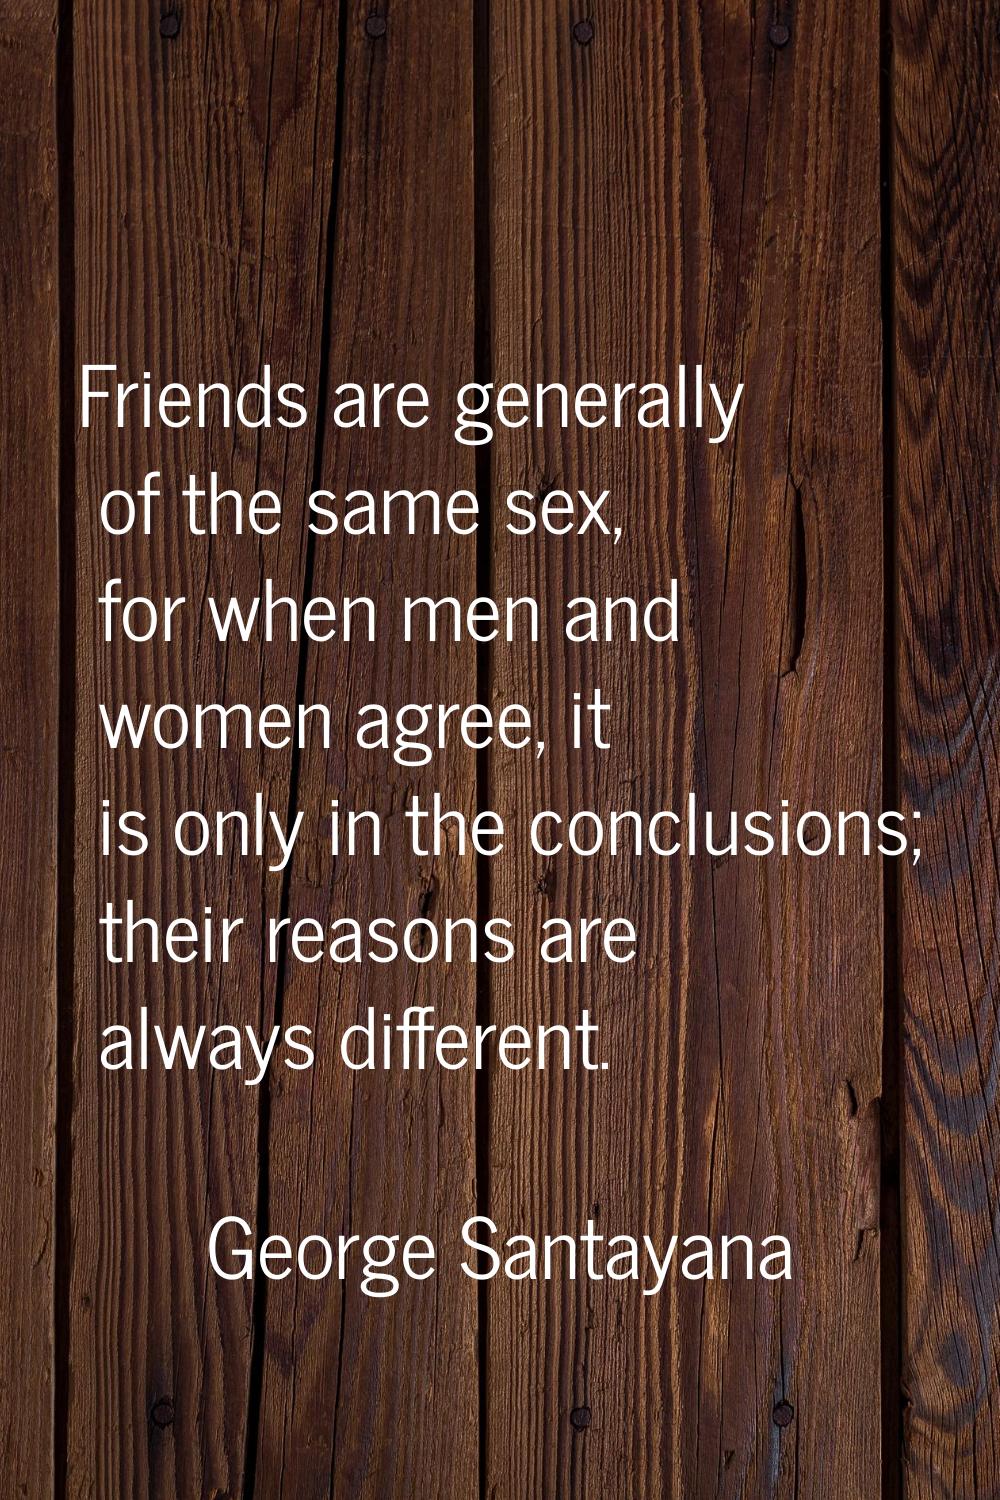 Friends are generally of the same sex, for when men and women agree, it is only in the conclusions;